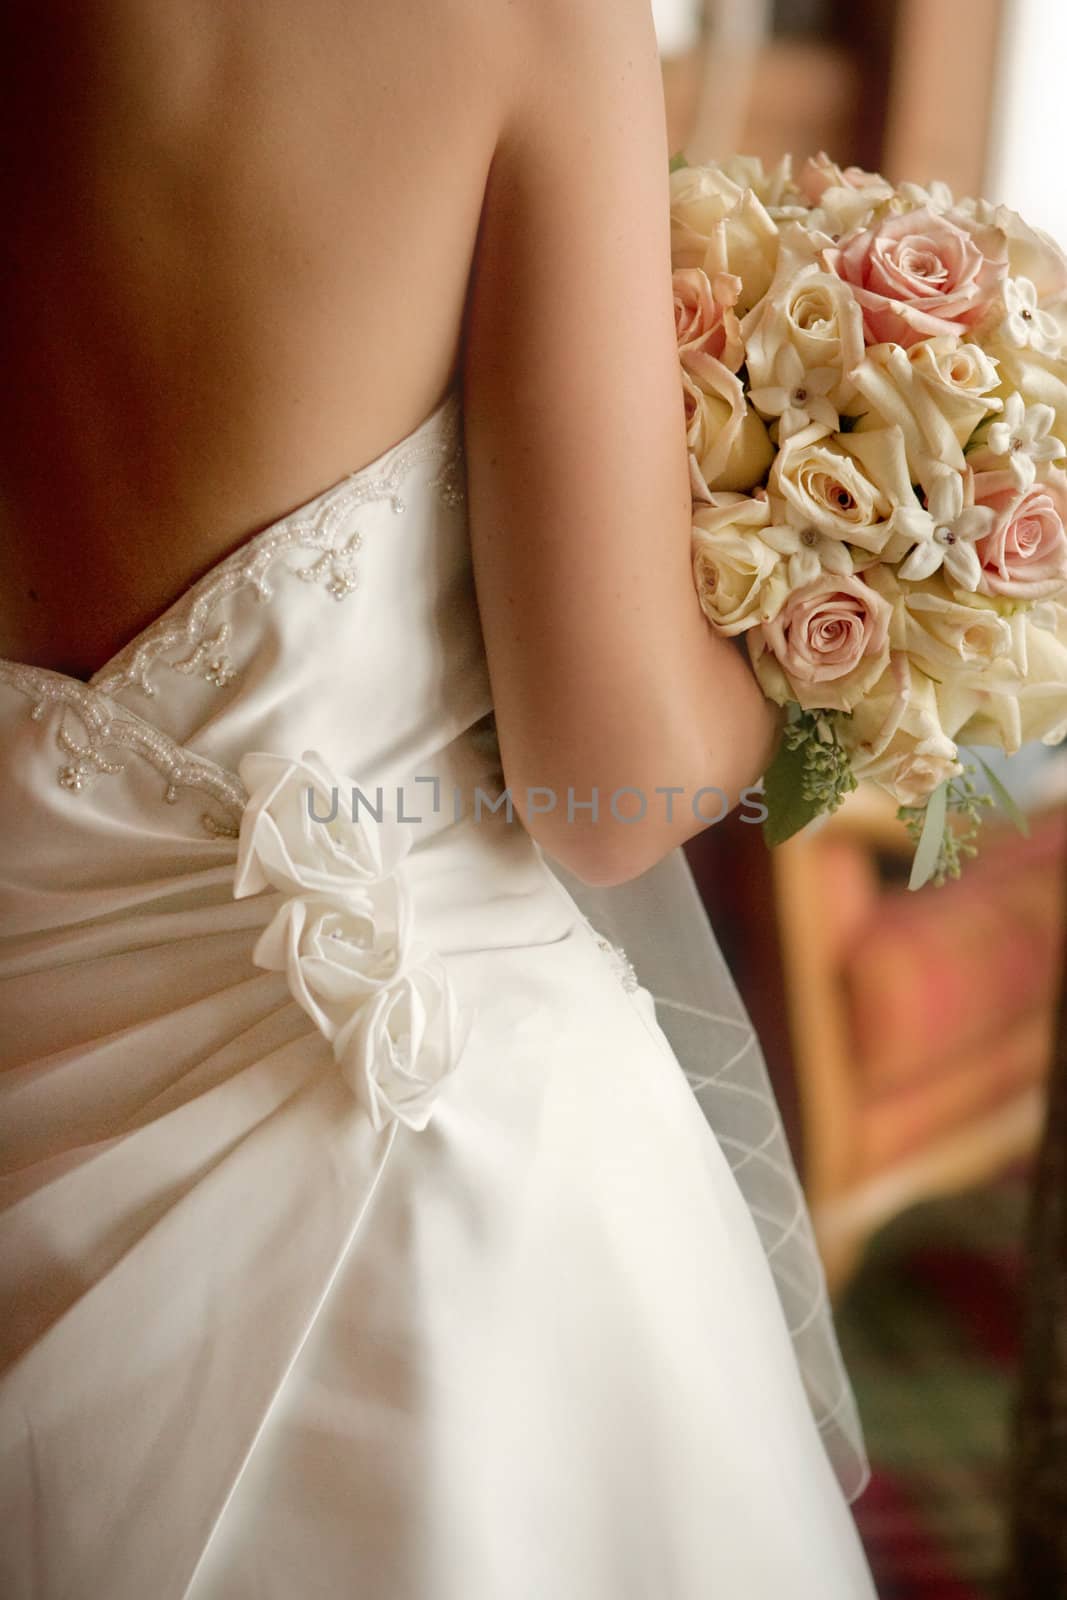 A back view of a bride with her bouquet